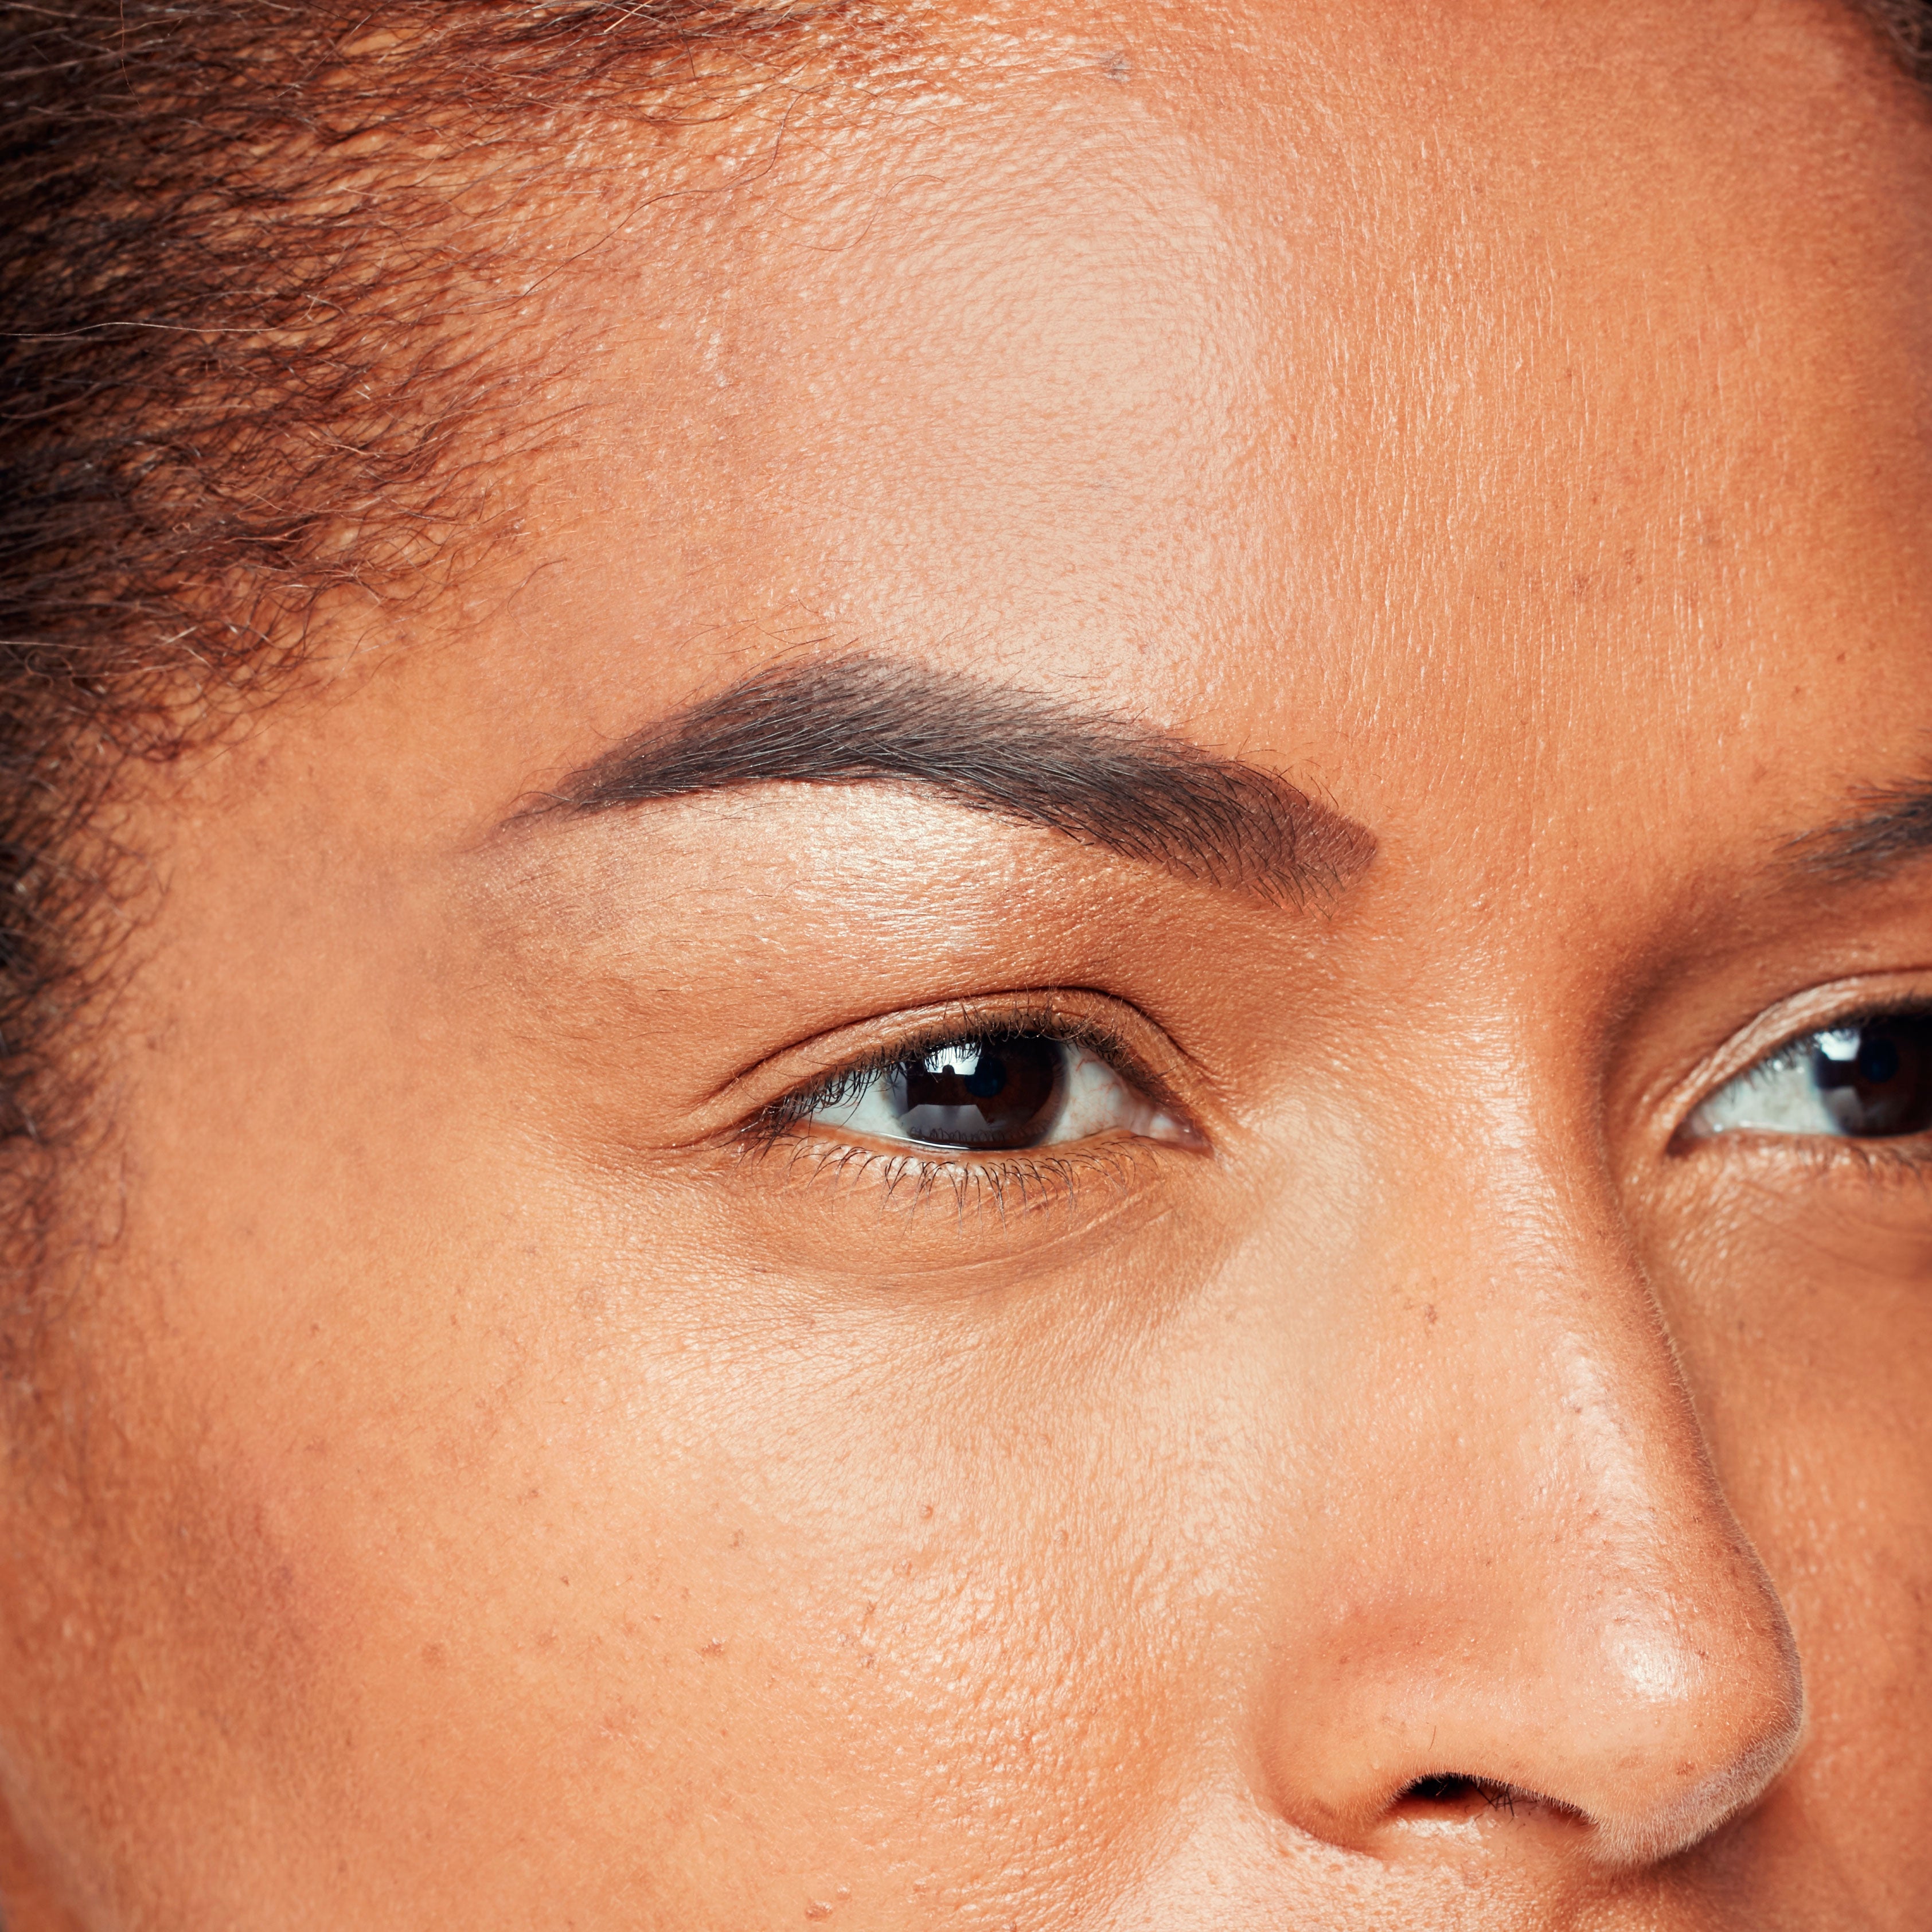 Learn How To Contour Your Eyes and Lips With Our Step by Step Guide
